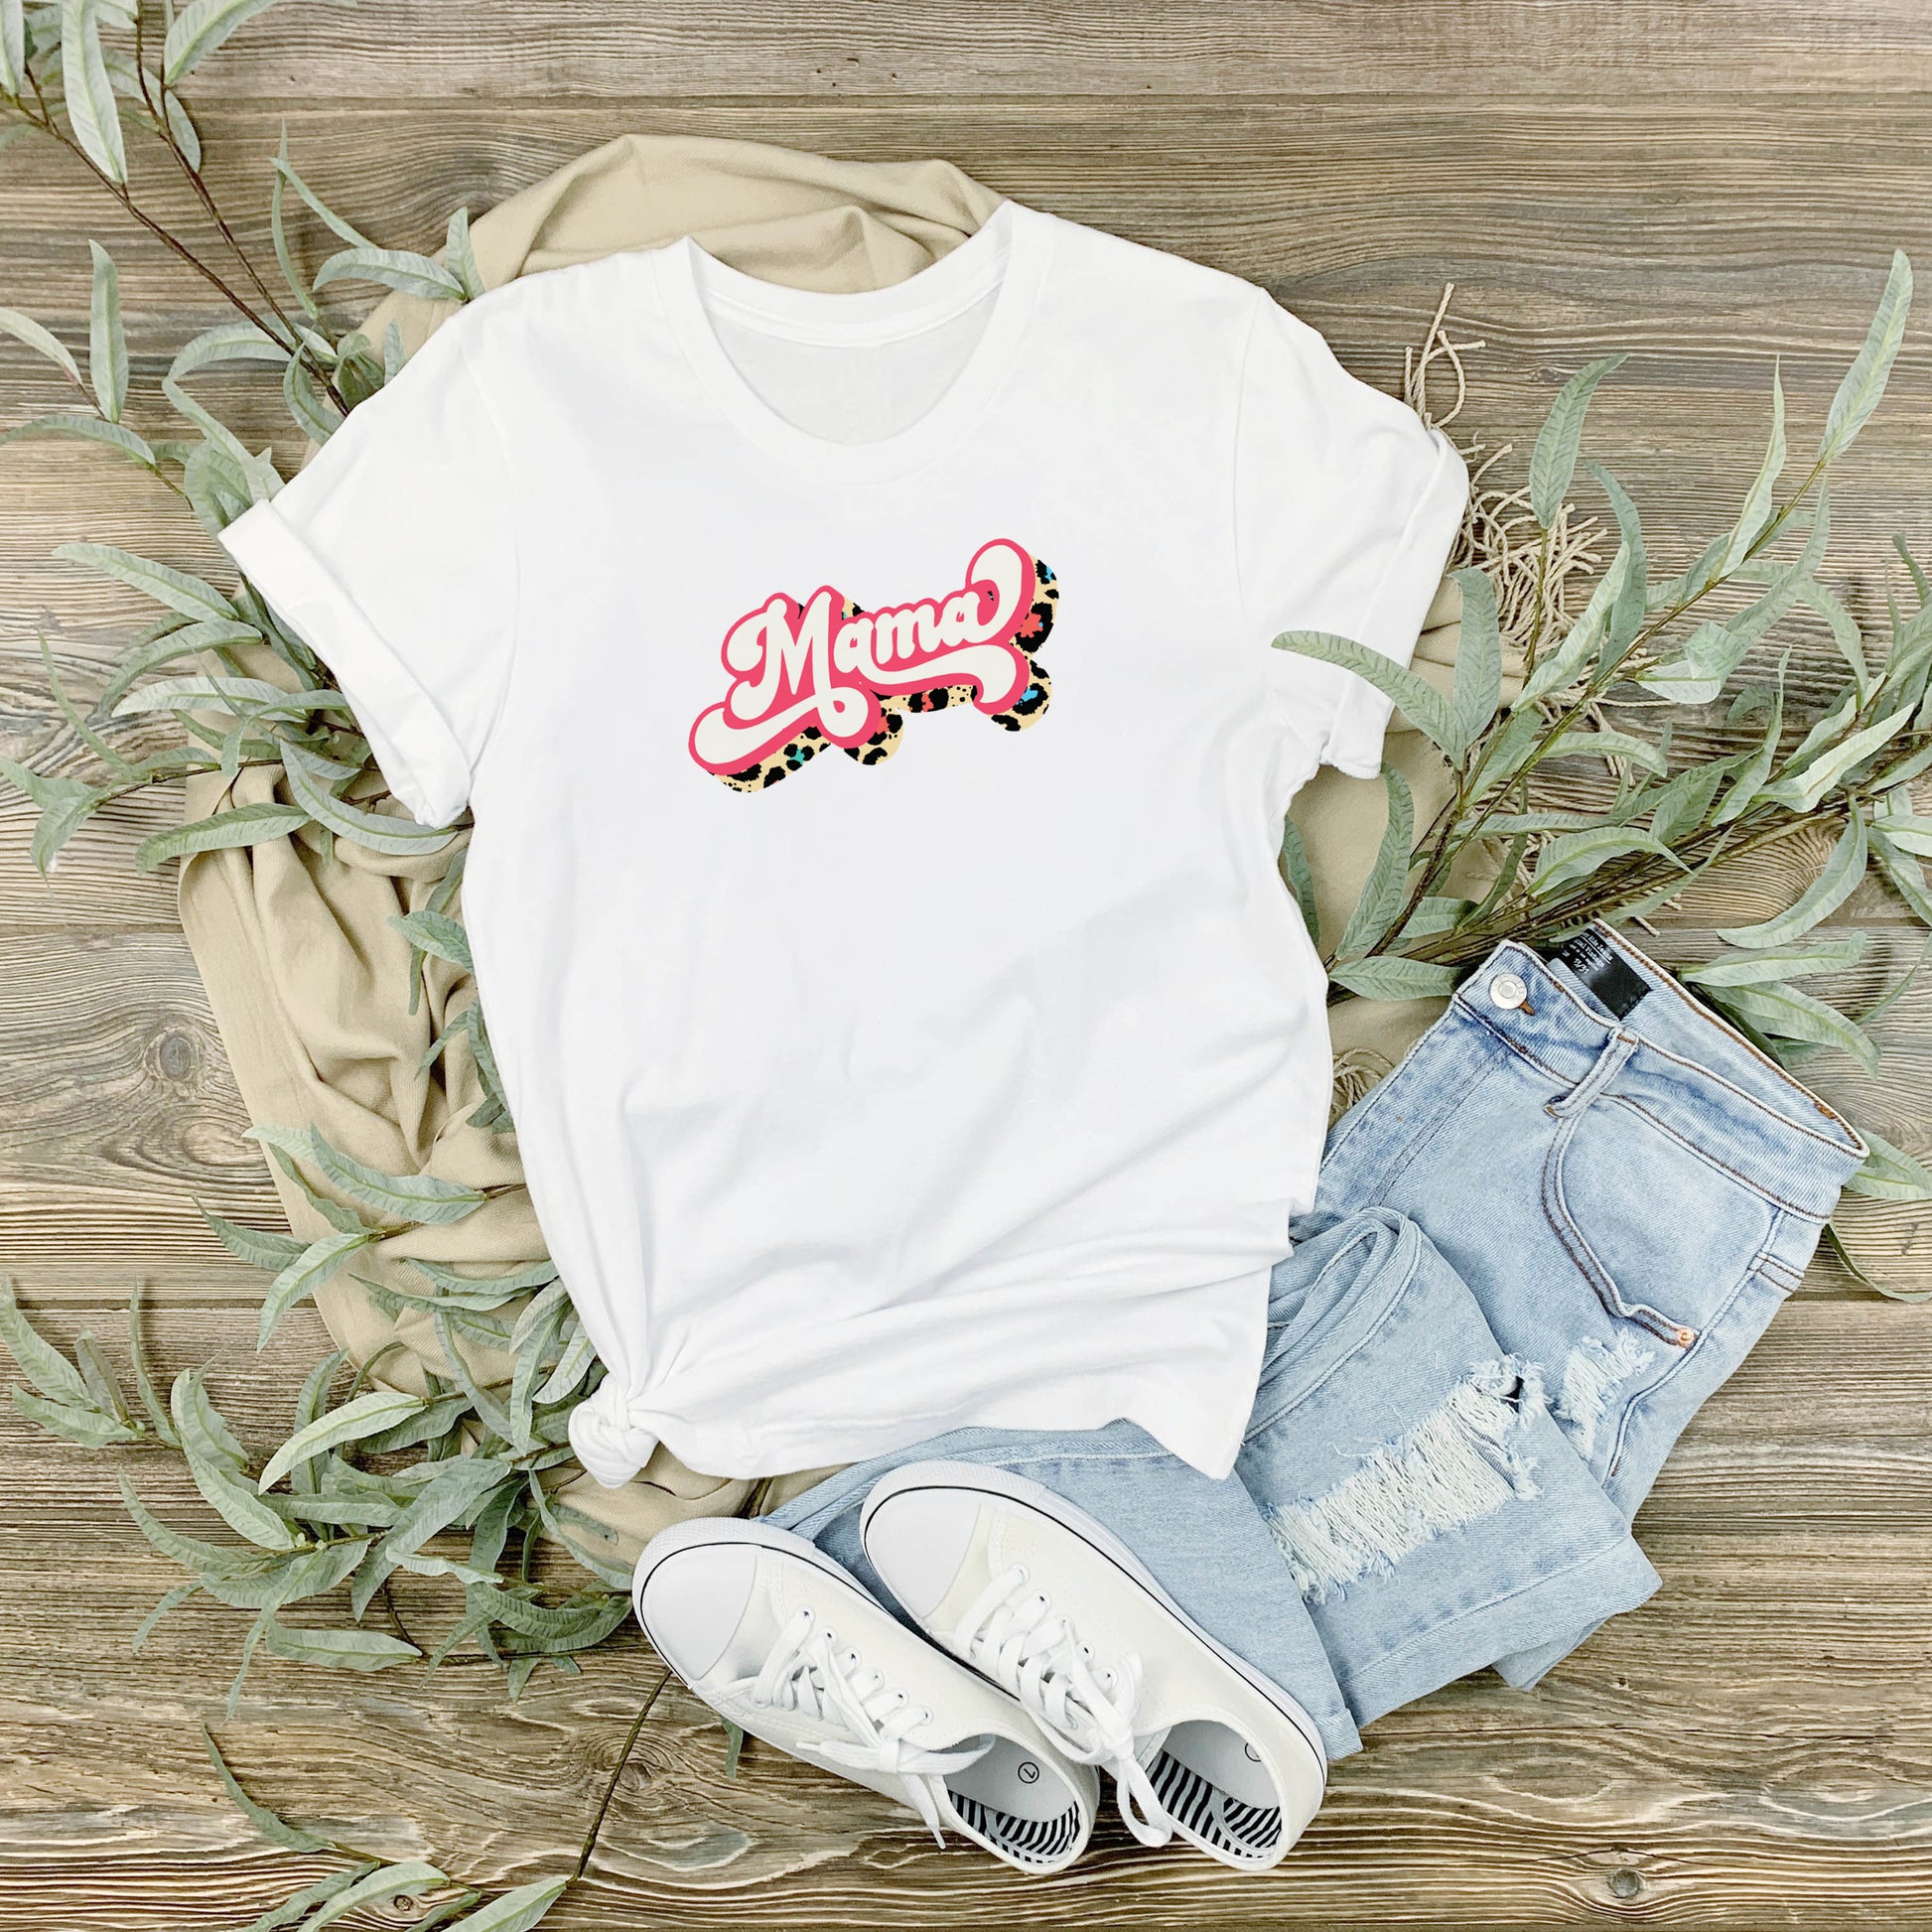 Organic cotton t shirt with Mama design paired with jeans and pumps for casual look